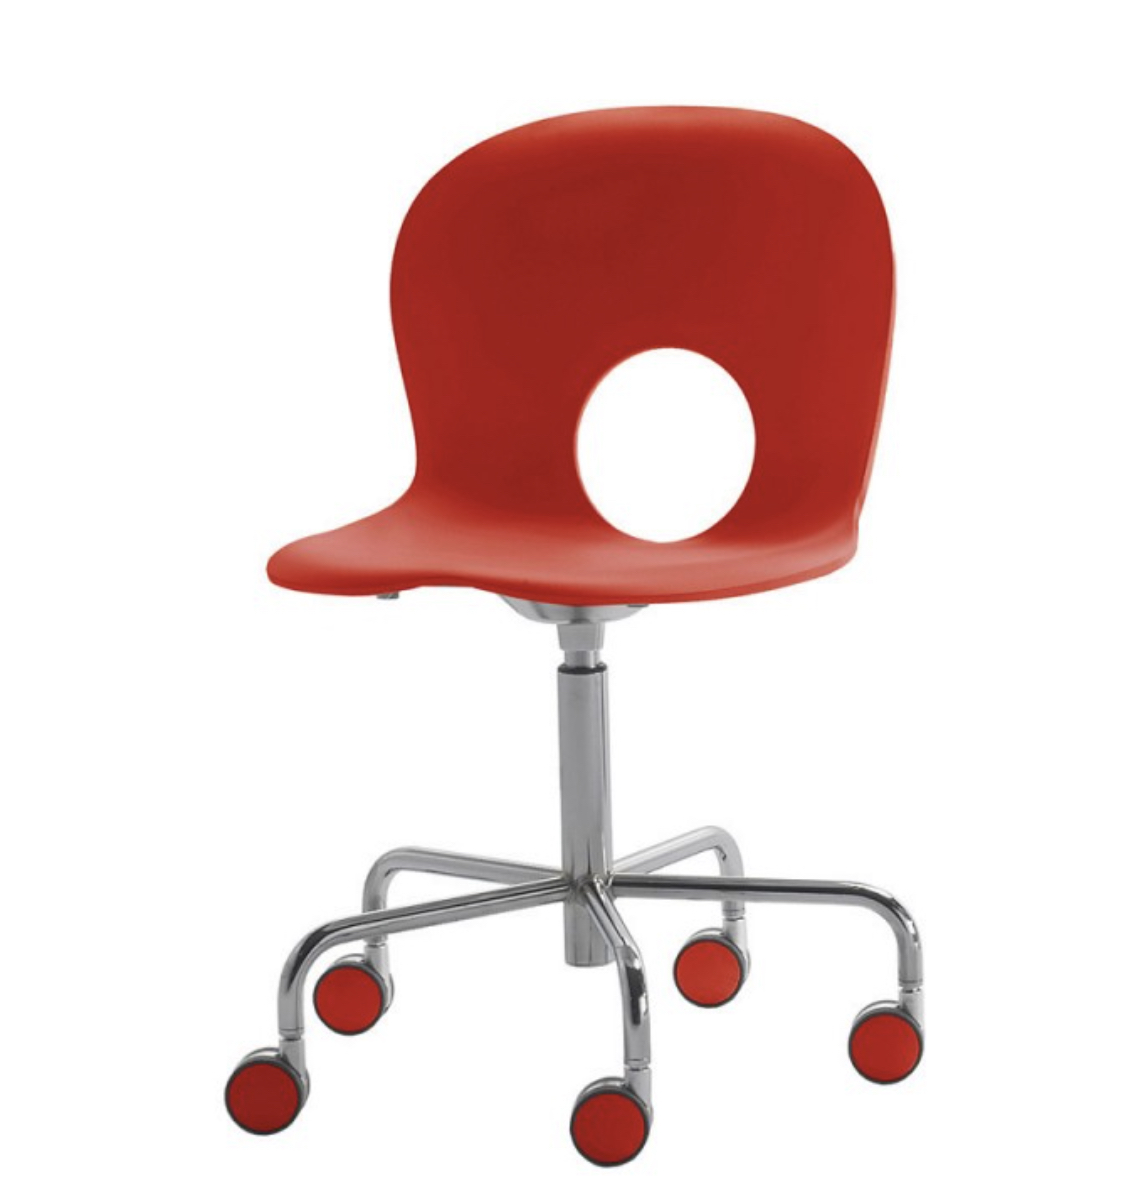 Swivel chair OLIVIA by Rexite